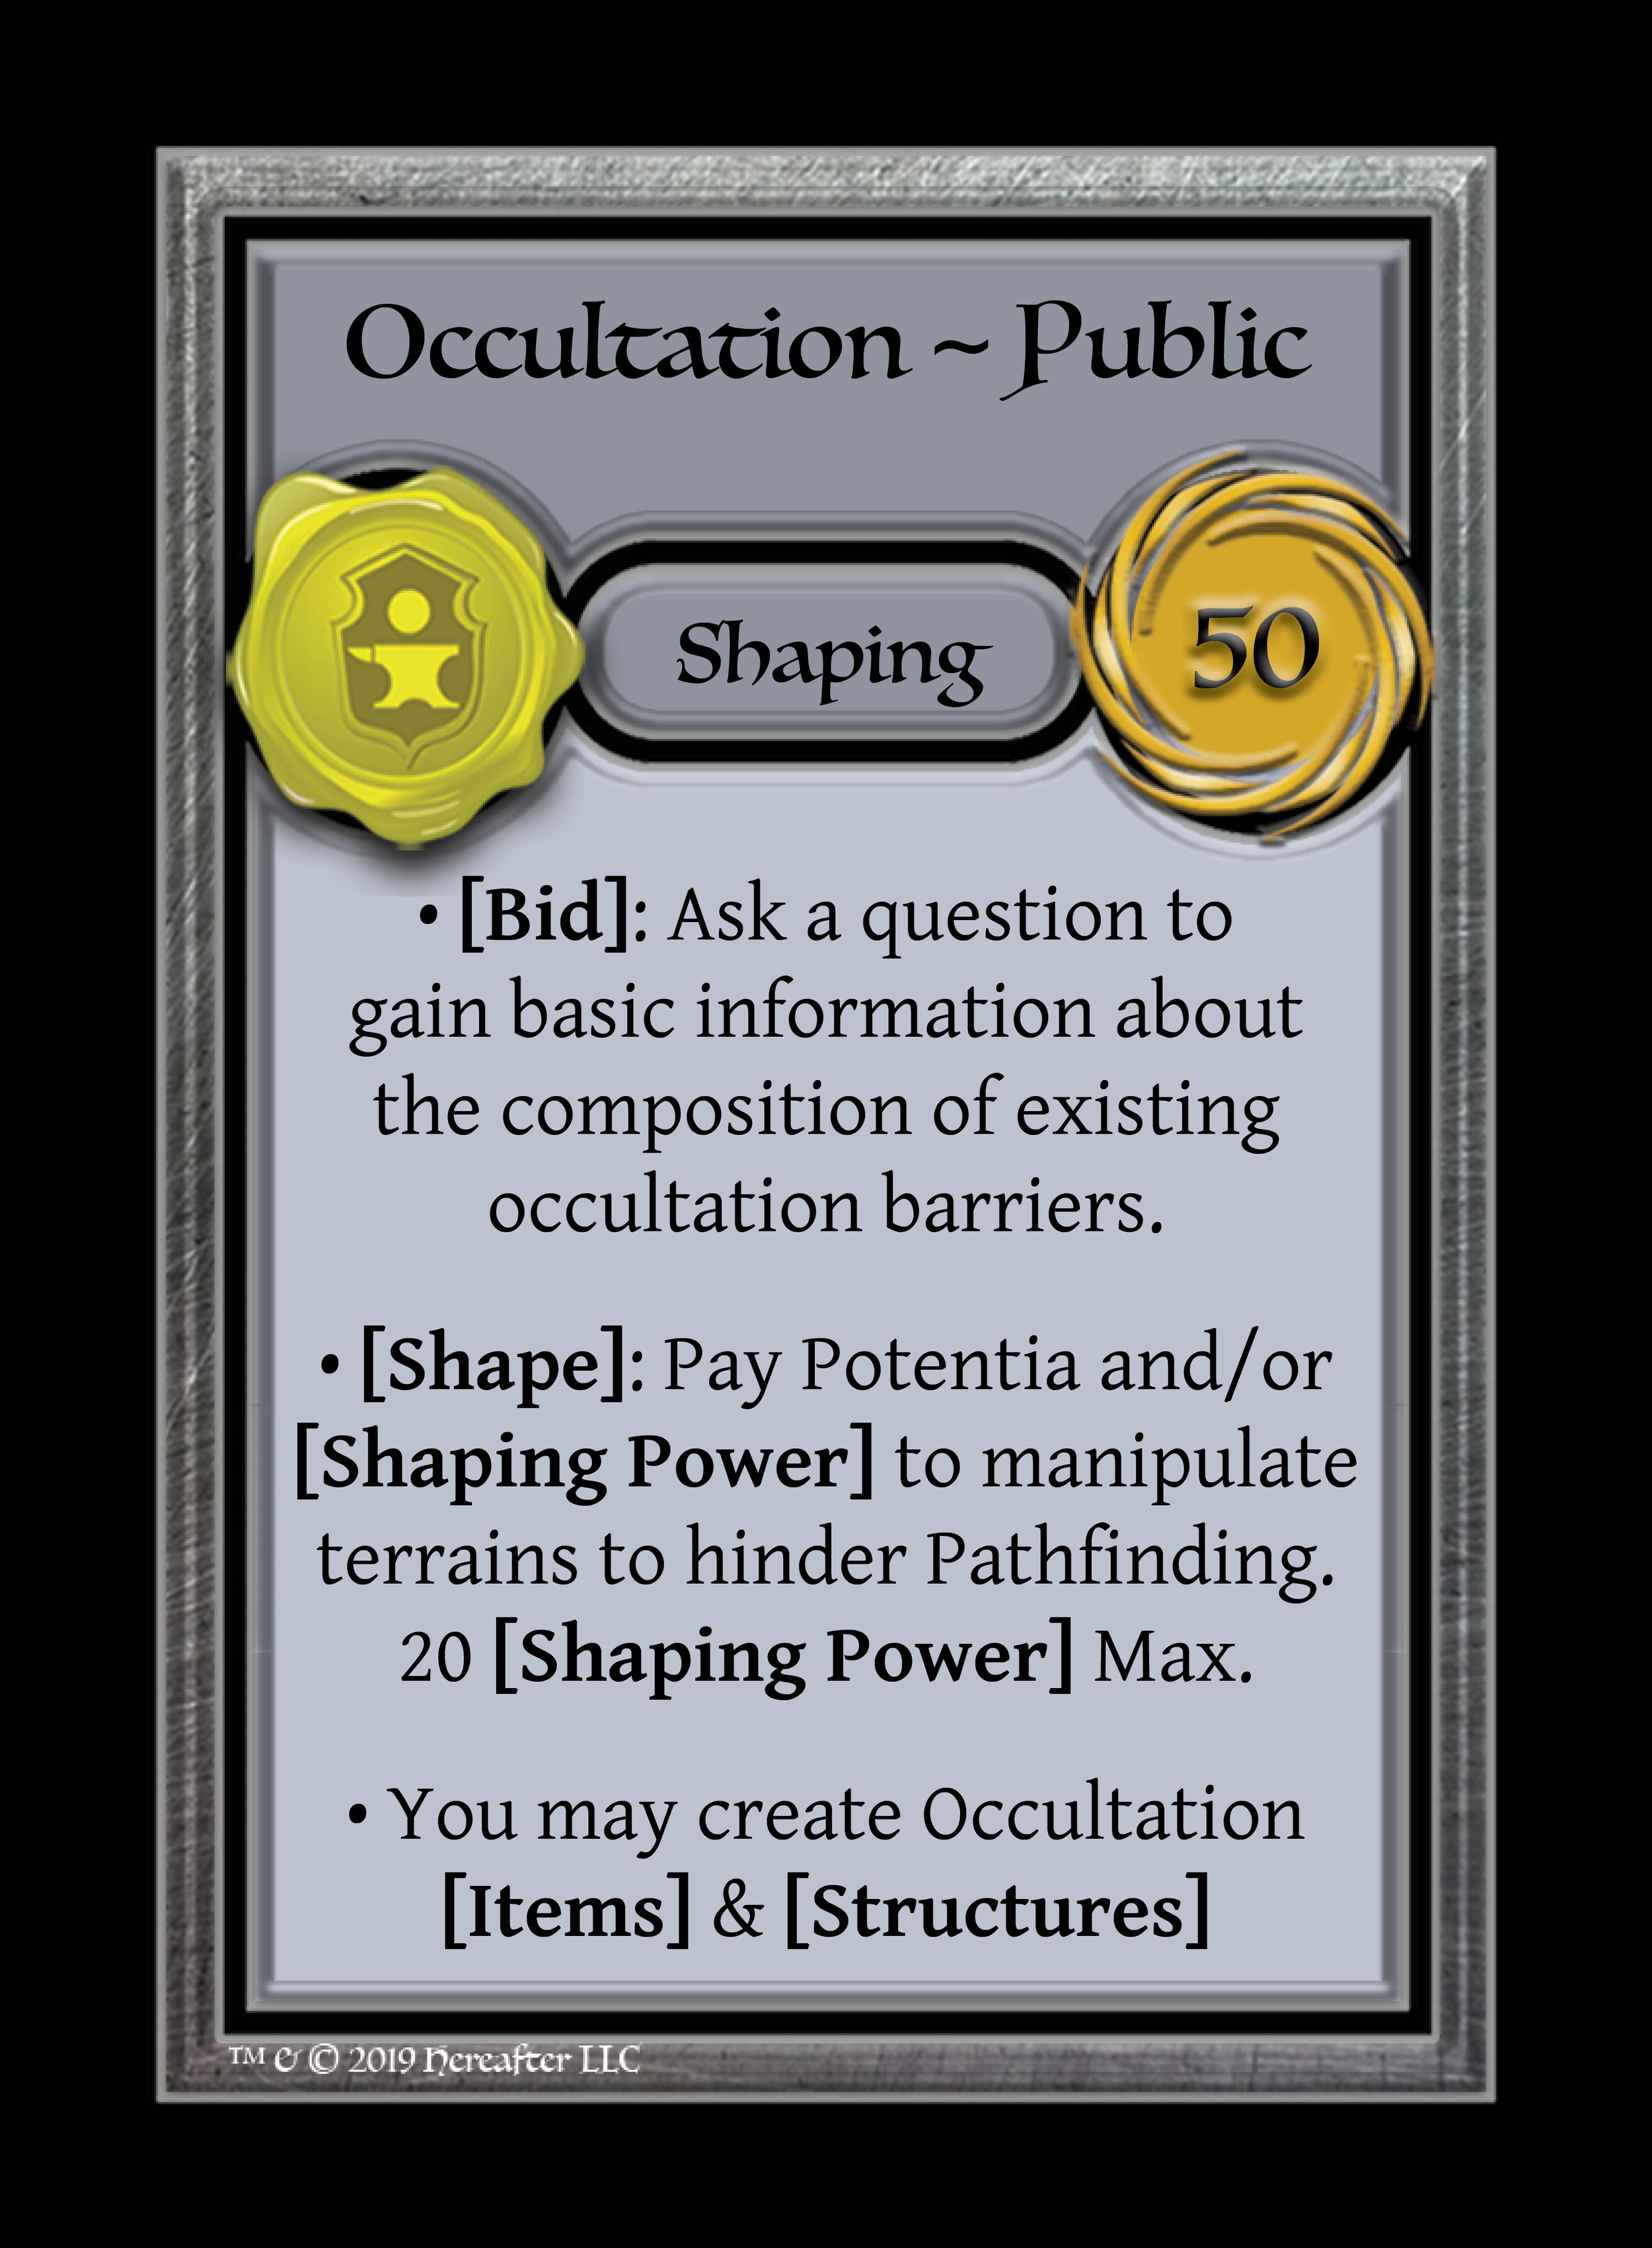 251_Shaping_Occultation ~ Public_().png